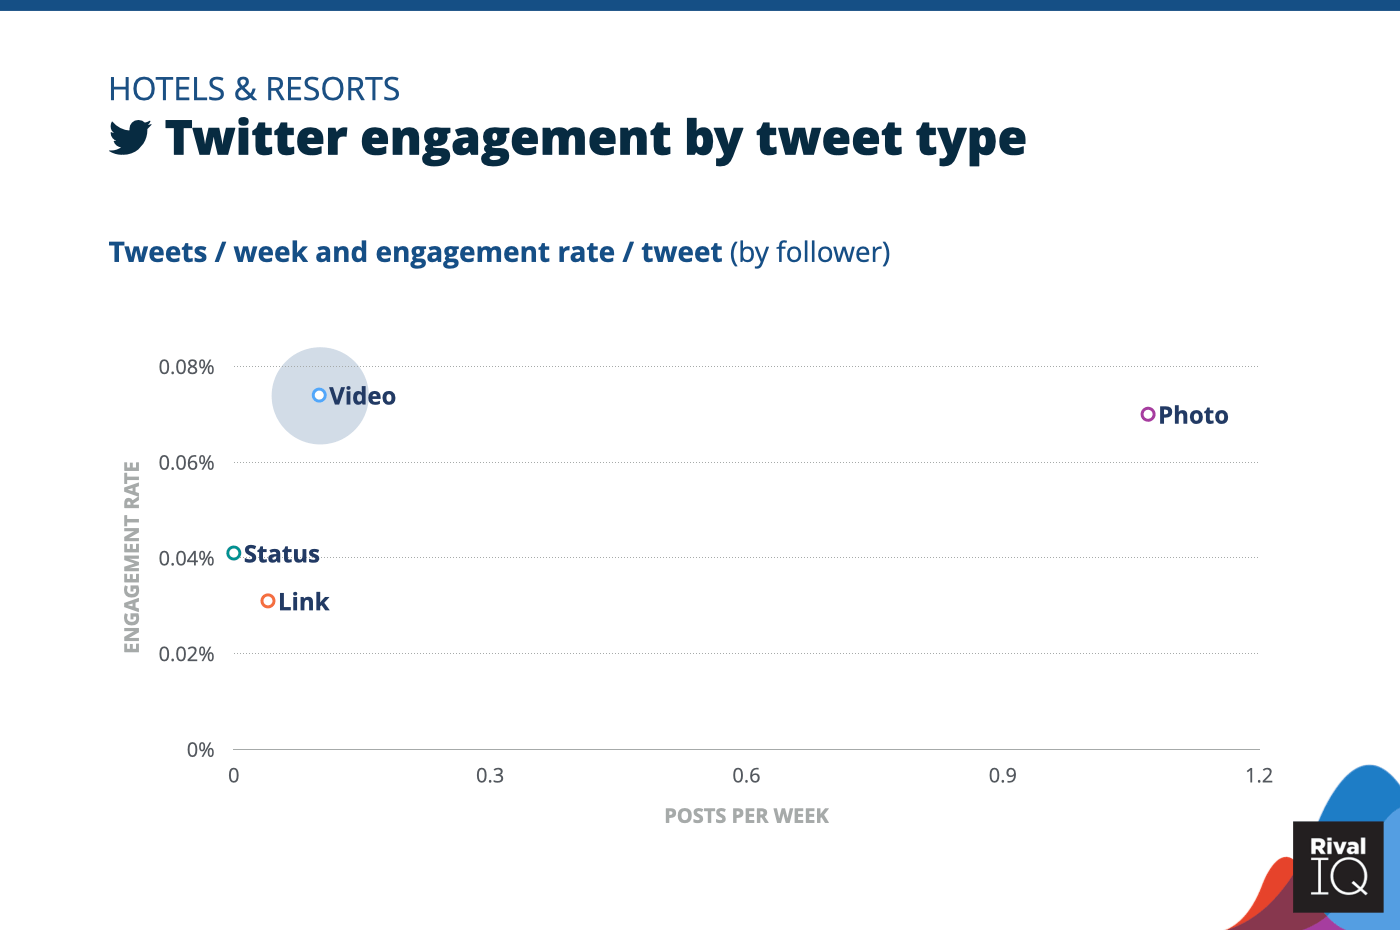 Chart of Twitter posts per week and engagement rate by tweet type, Hotels & Resorts